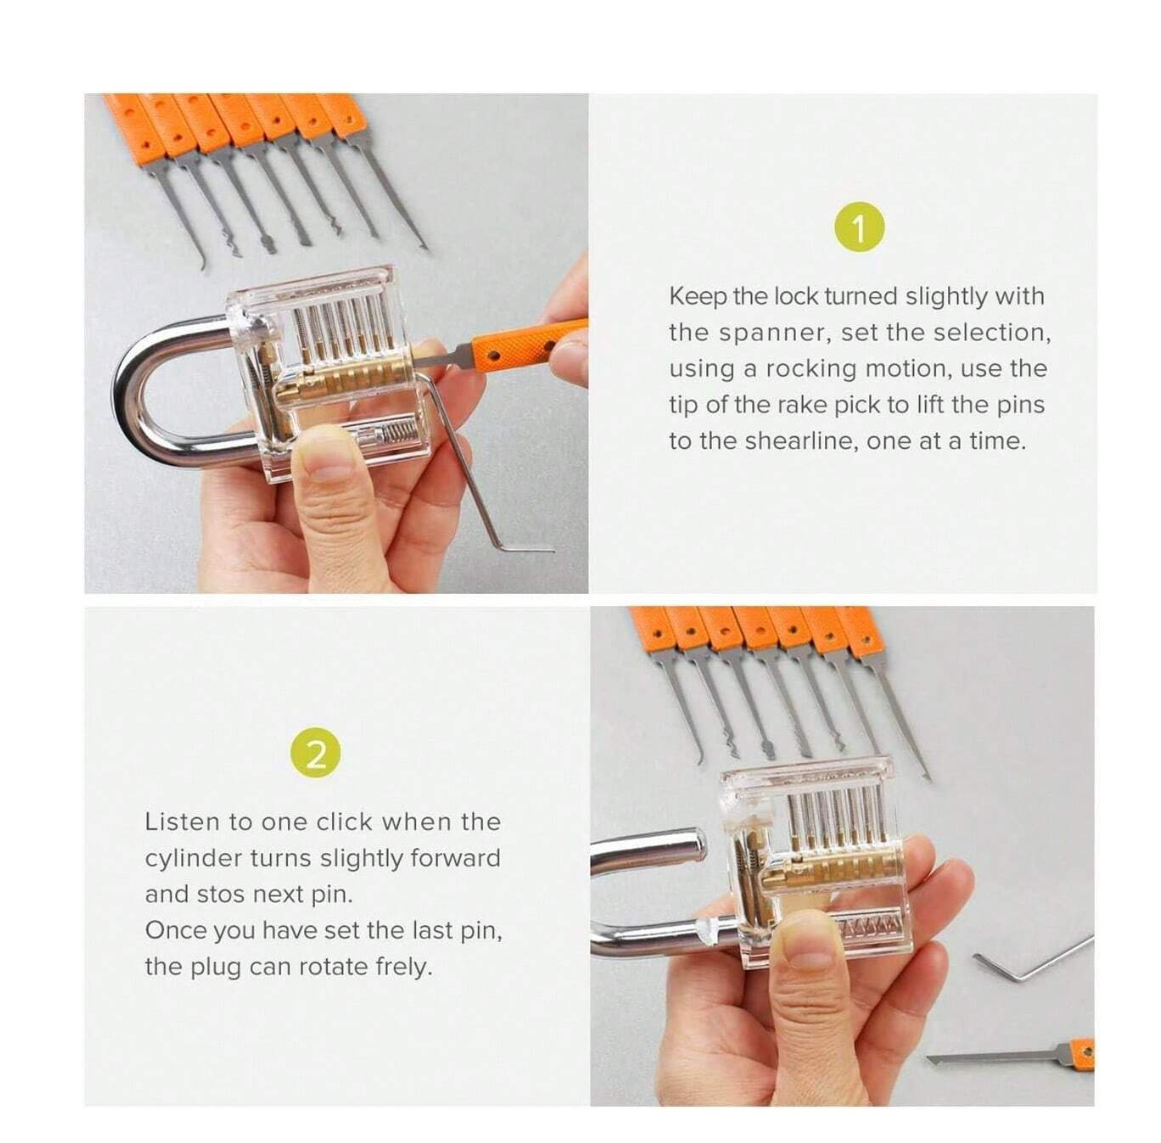 Unlock the Possibilities: 17Pcs Stainless Steel Lock Pick Set with Clear Practice Locks - Perfect for Beginners and Training! 🗝️🔒 #LockPickMasterclass